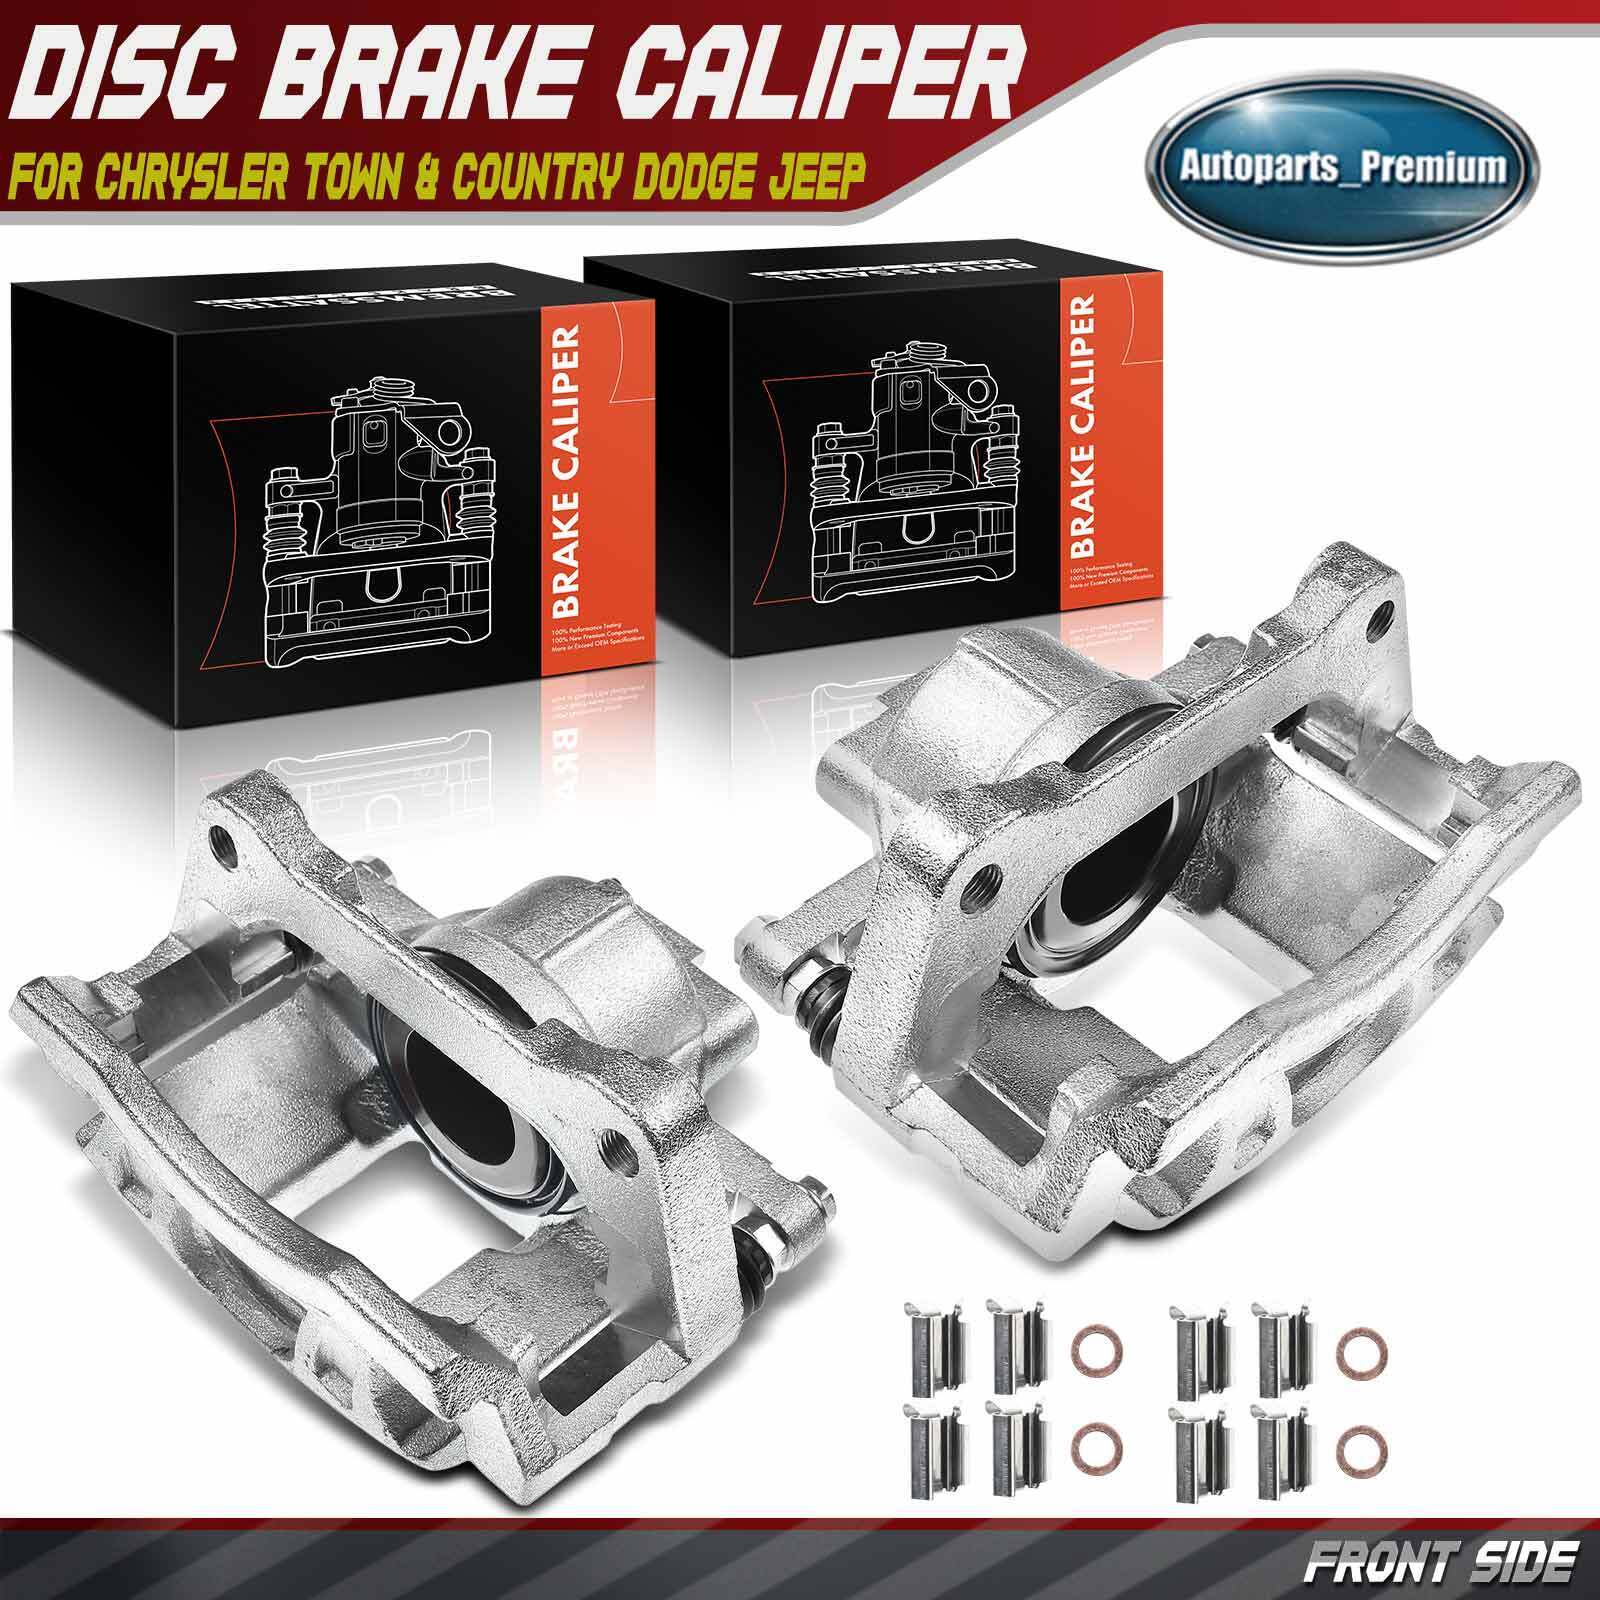 2x Brake Calipers w/ Bracket for Chrysler Town & Country Dodge Jeep Ram VW Front